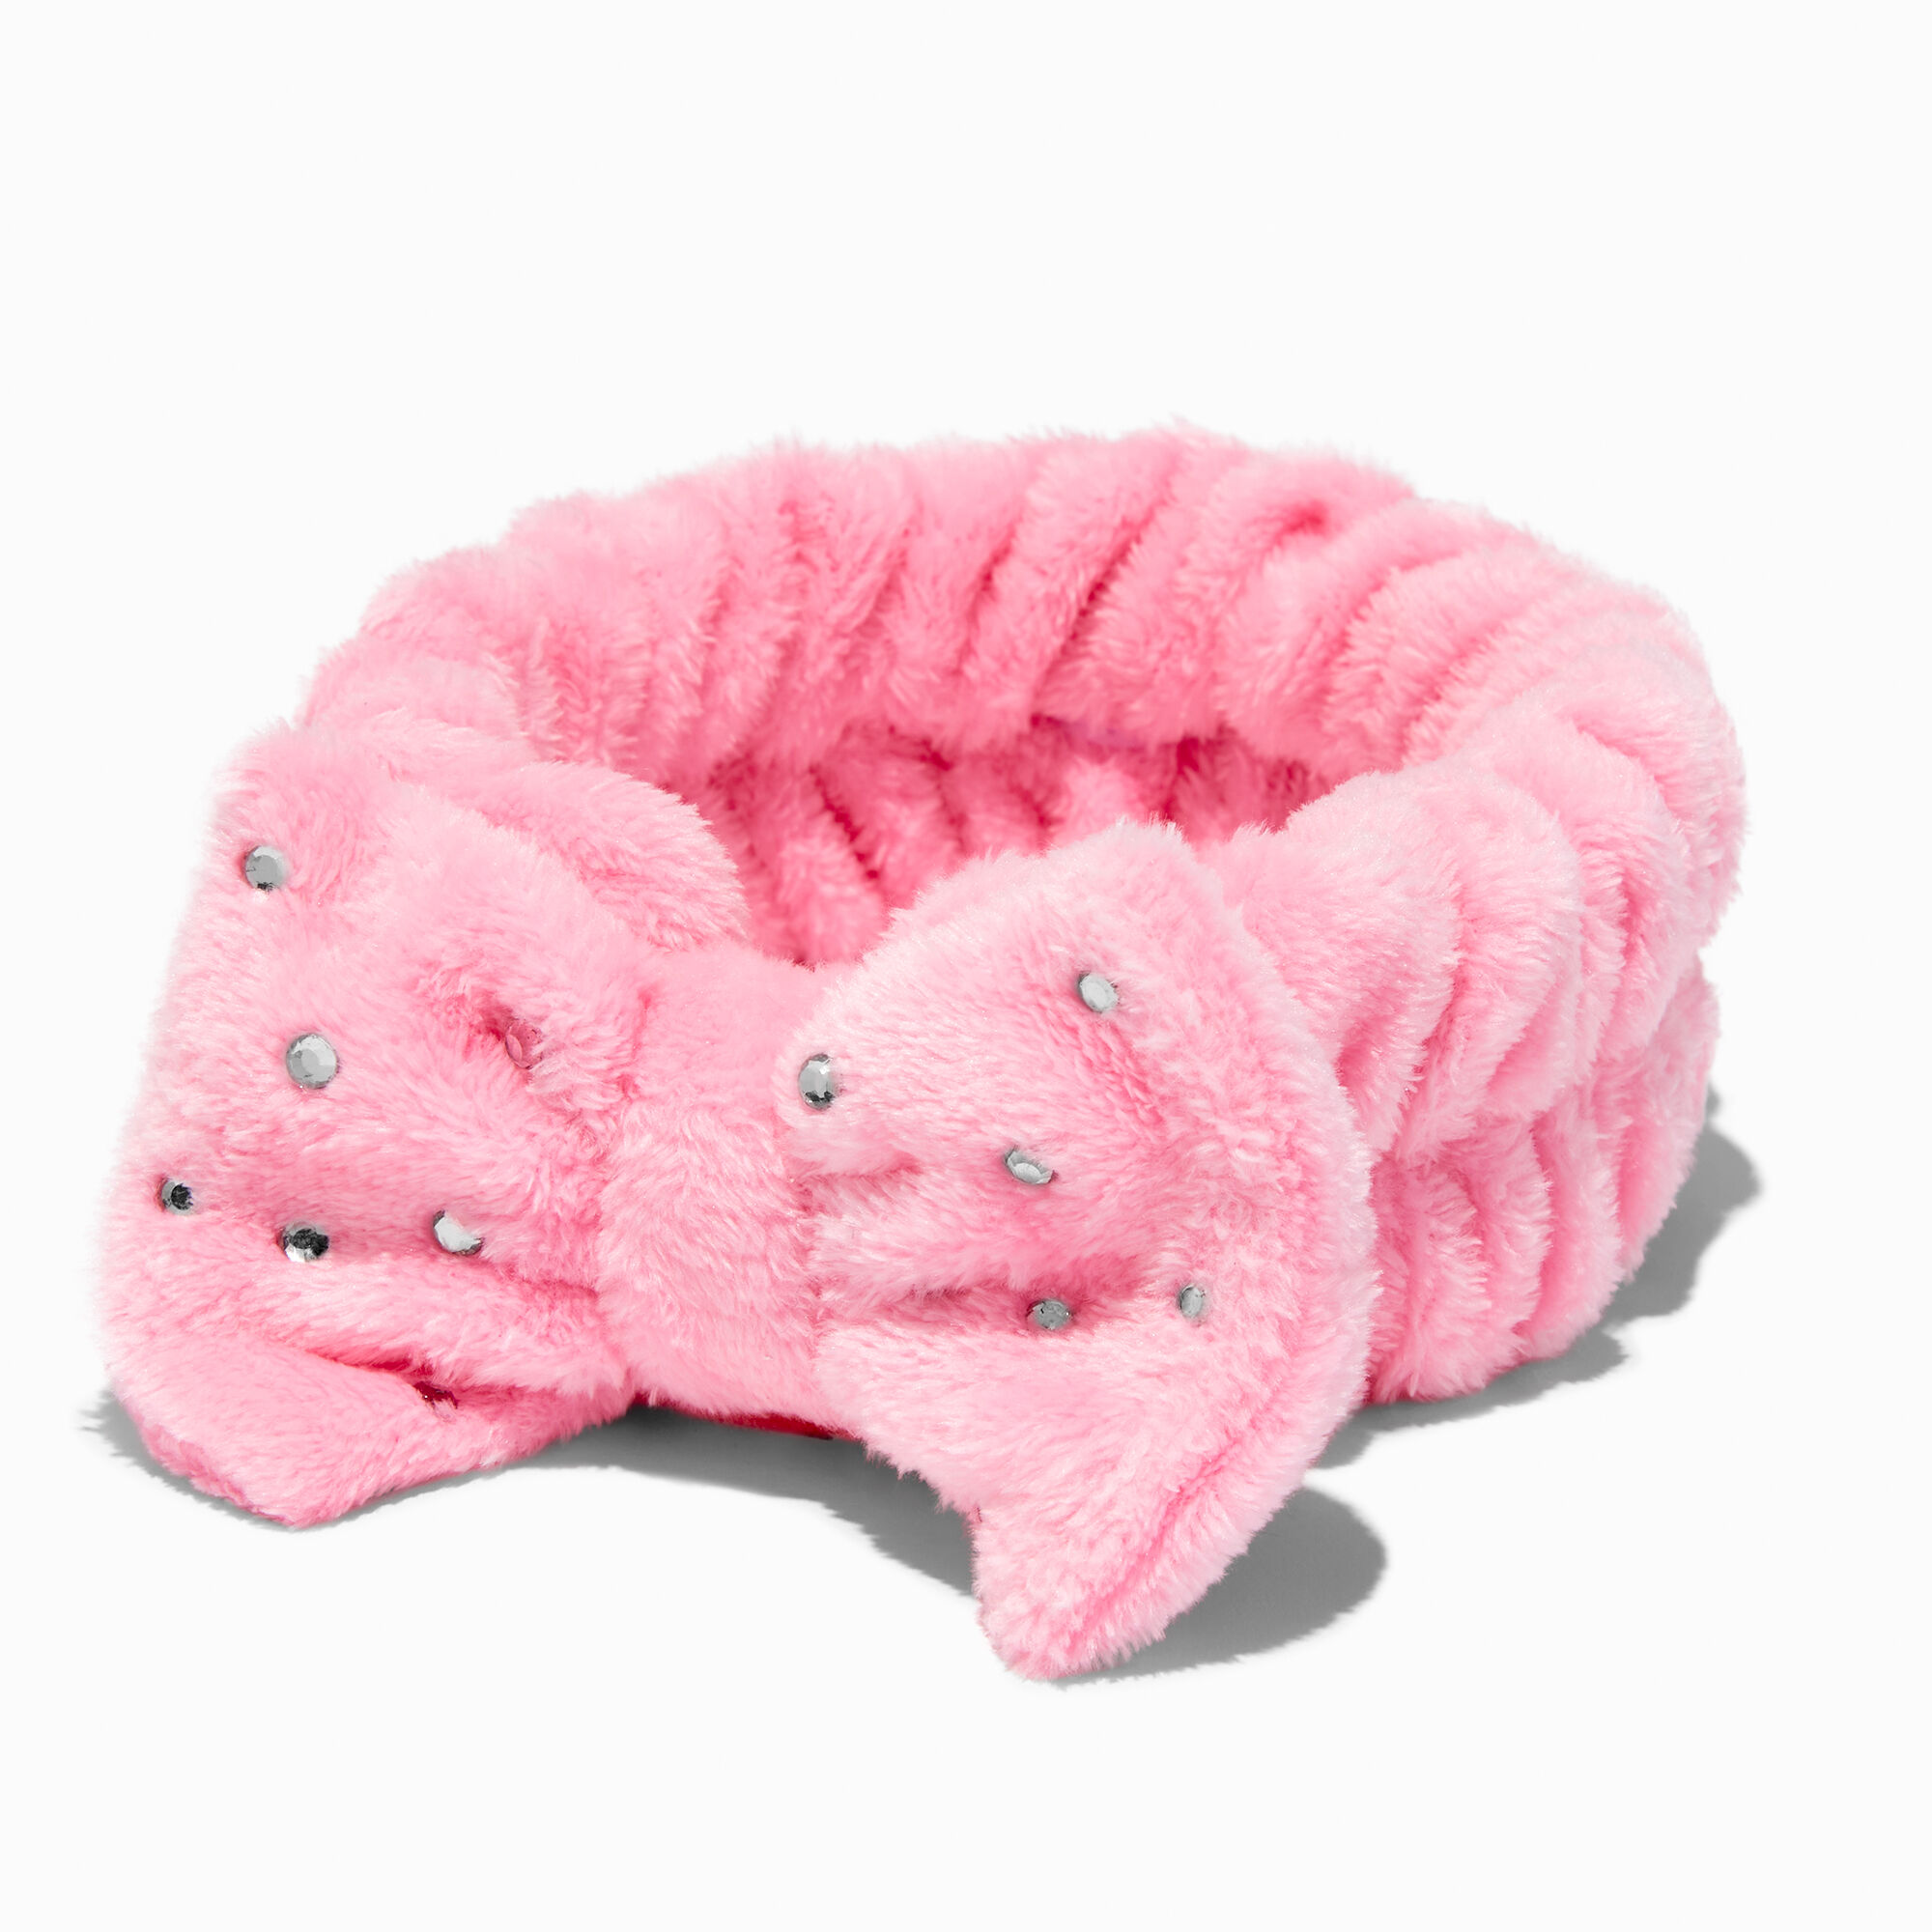 View Claires Blush Bling Furry Makeup Bow Headwrap information